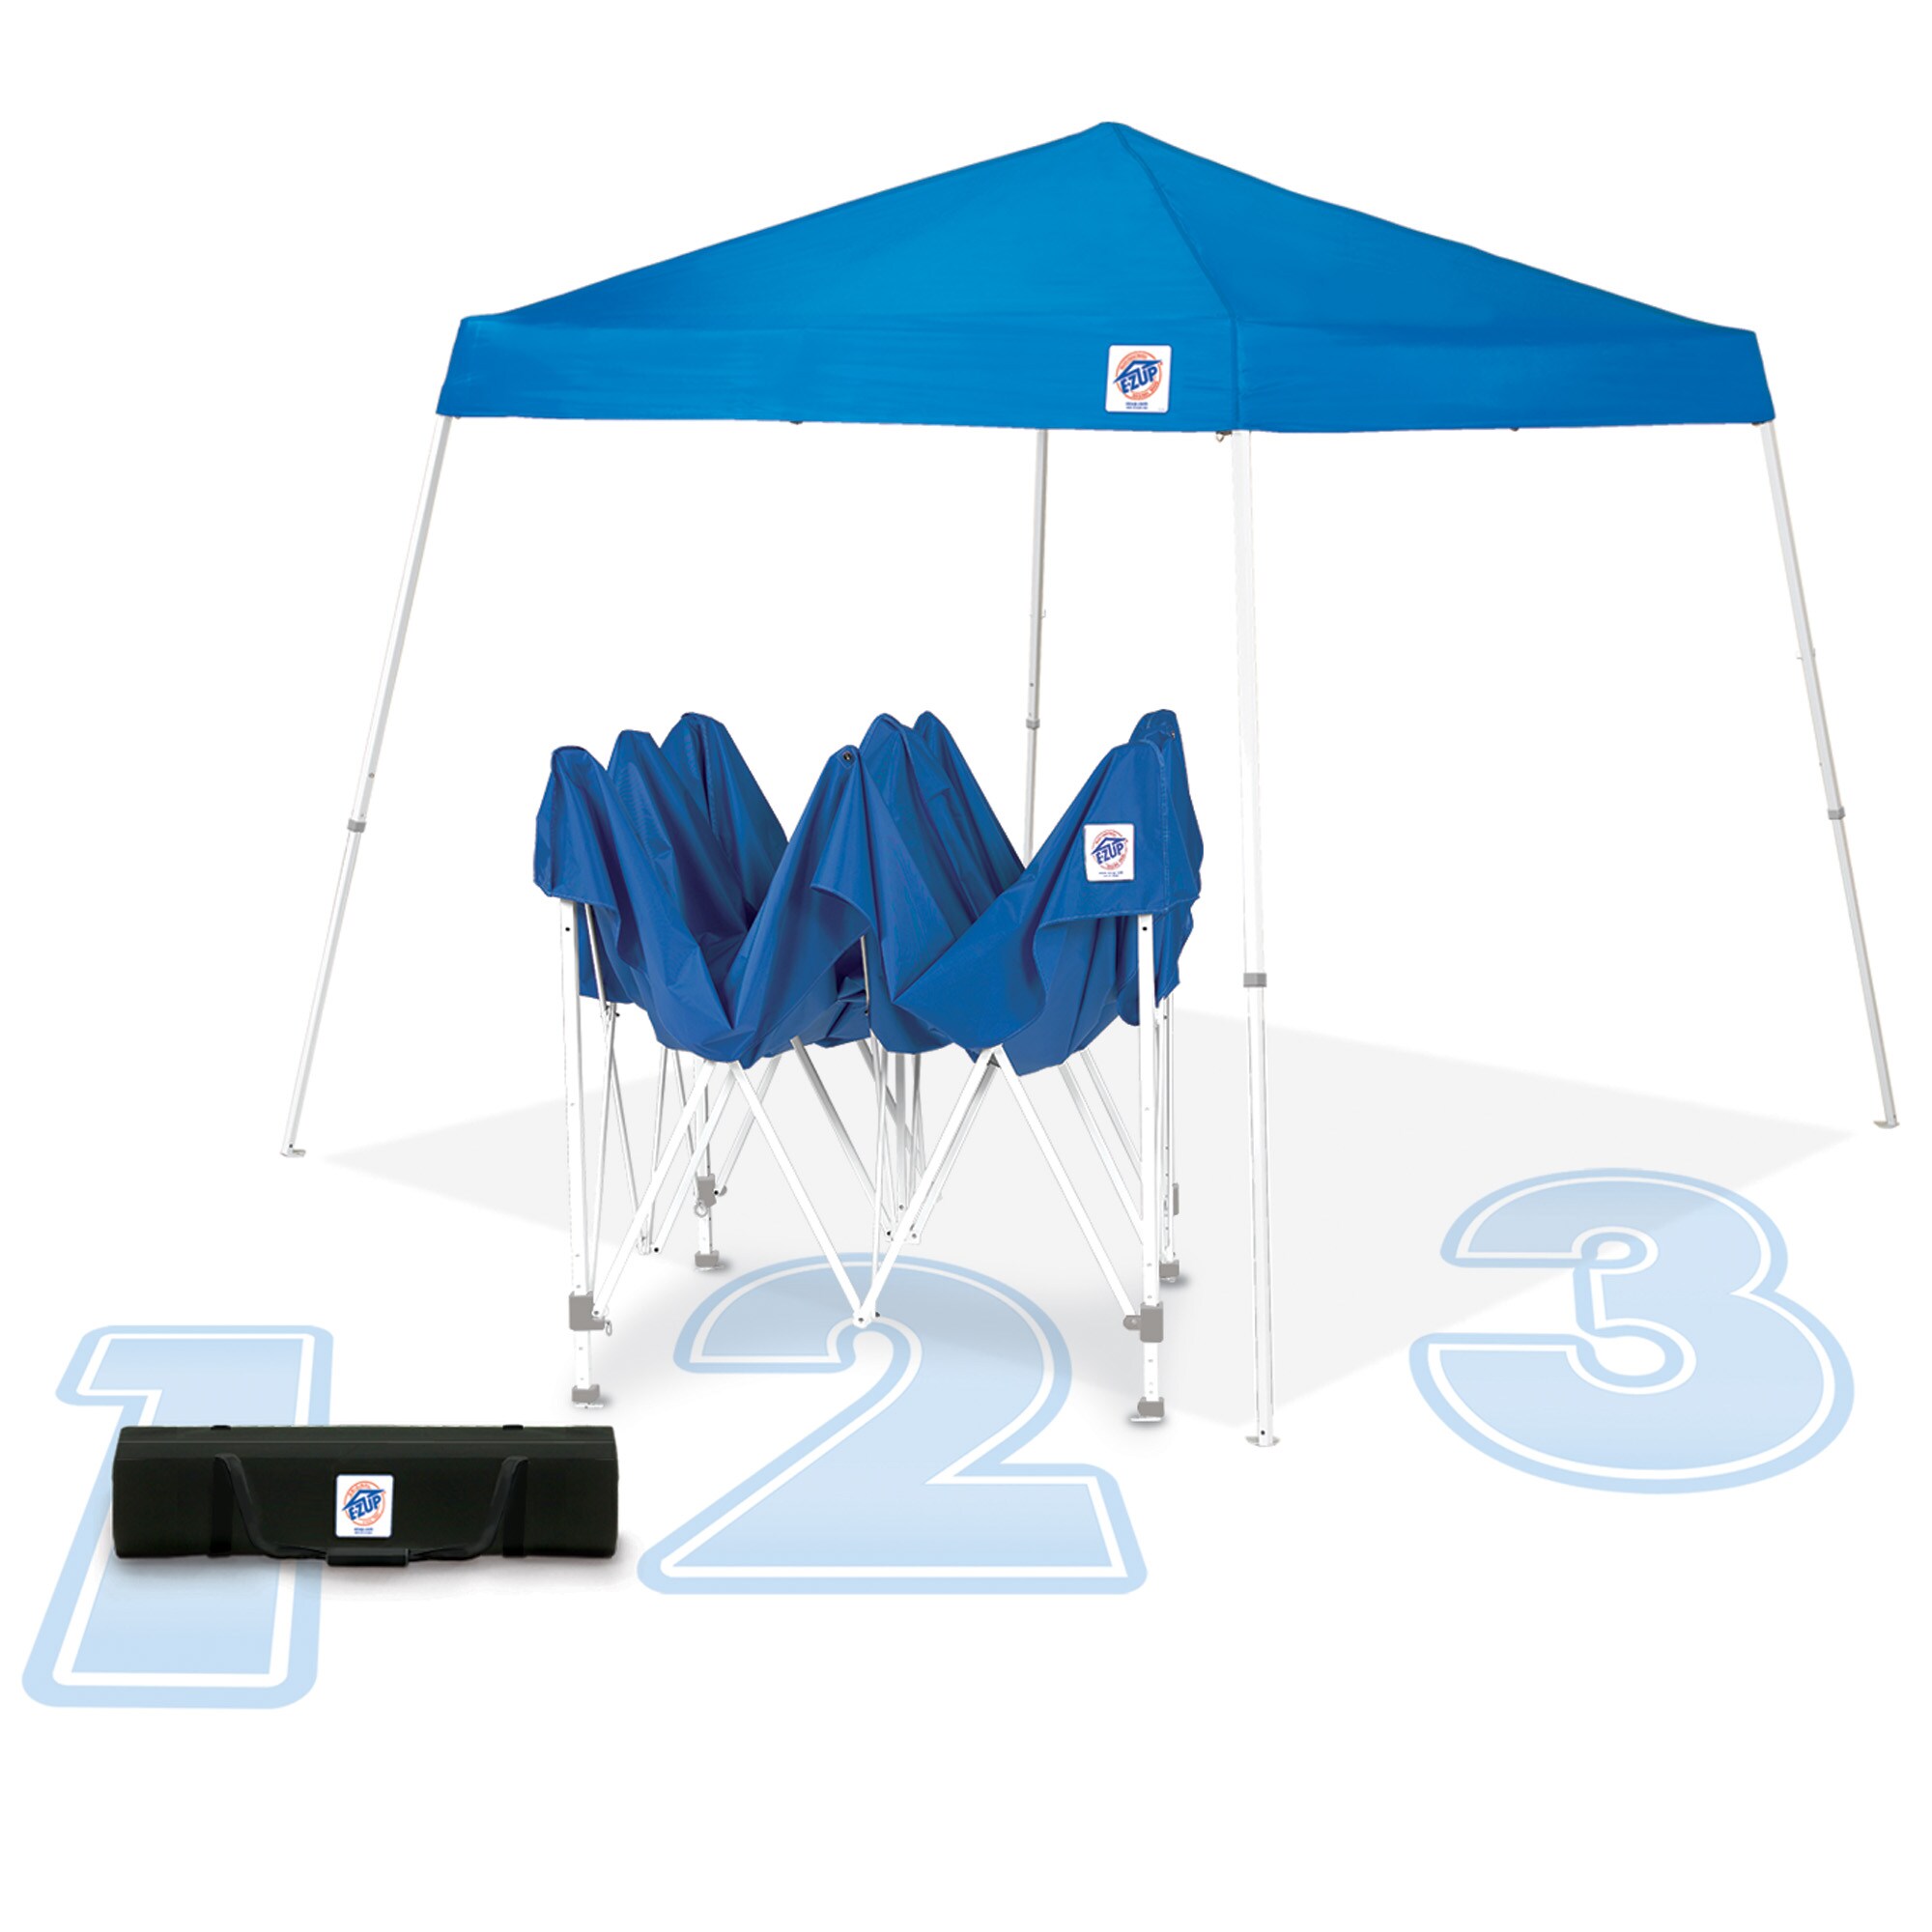 E-Z UP Recreational Half Wall Fits Angle Leg 12' Instant Shelters Royal Blue 